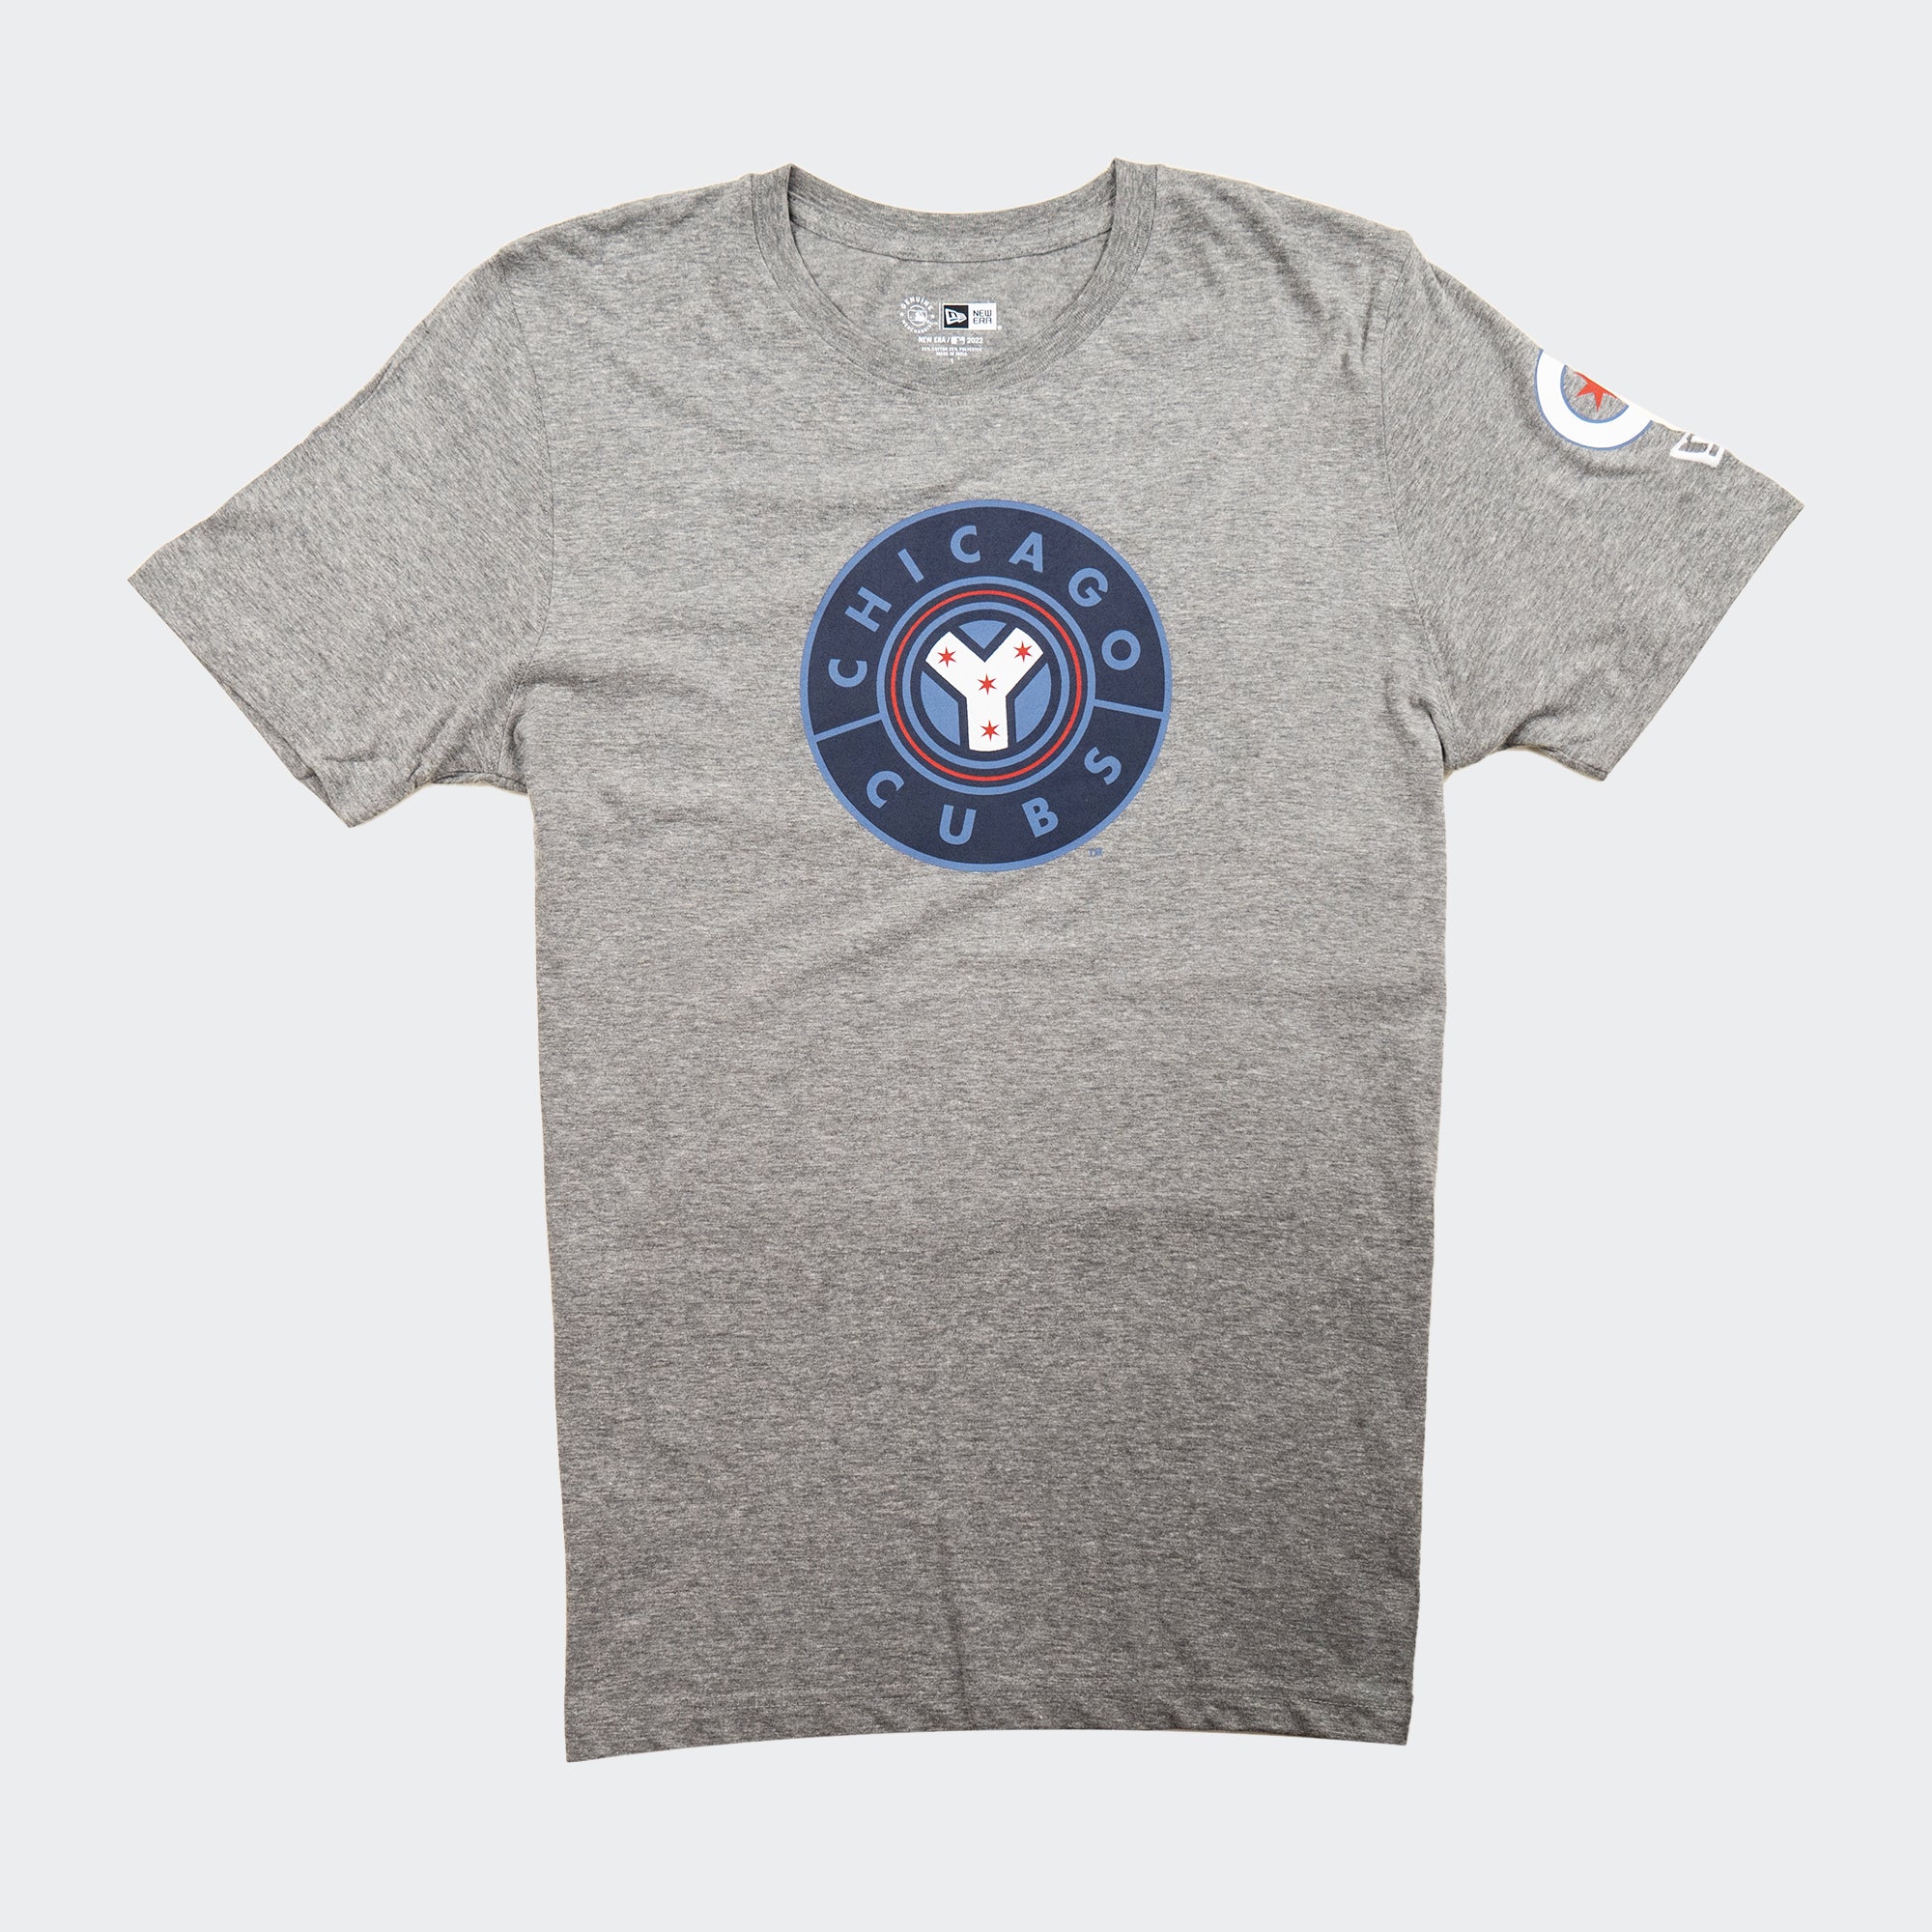 Chicago Cubs City Connect gear is available and amazing